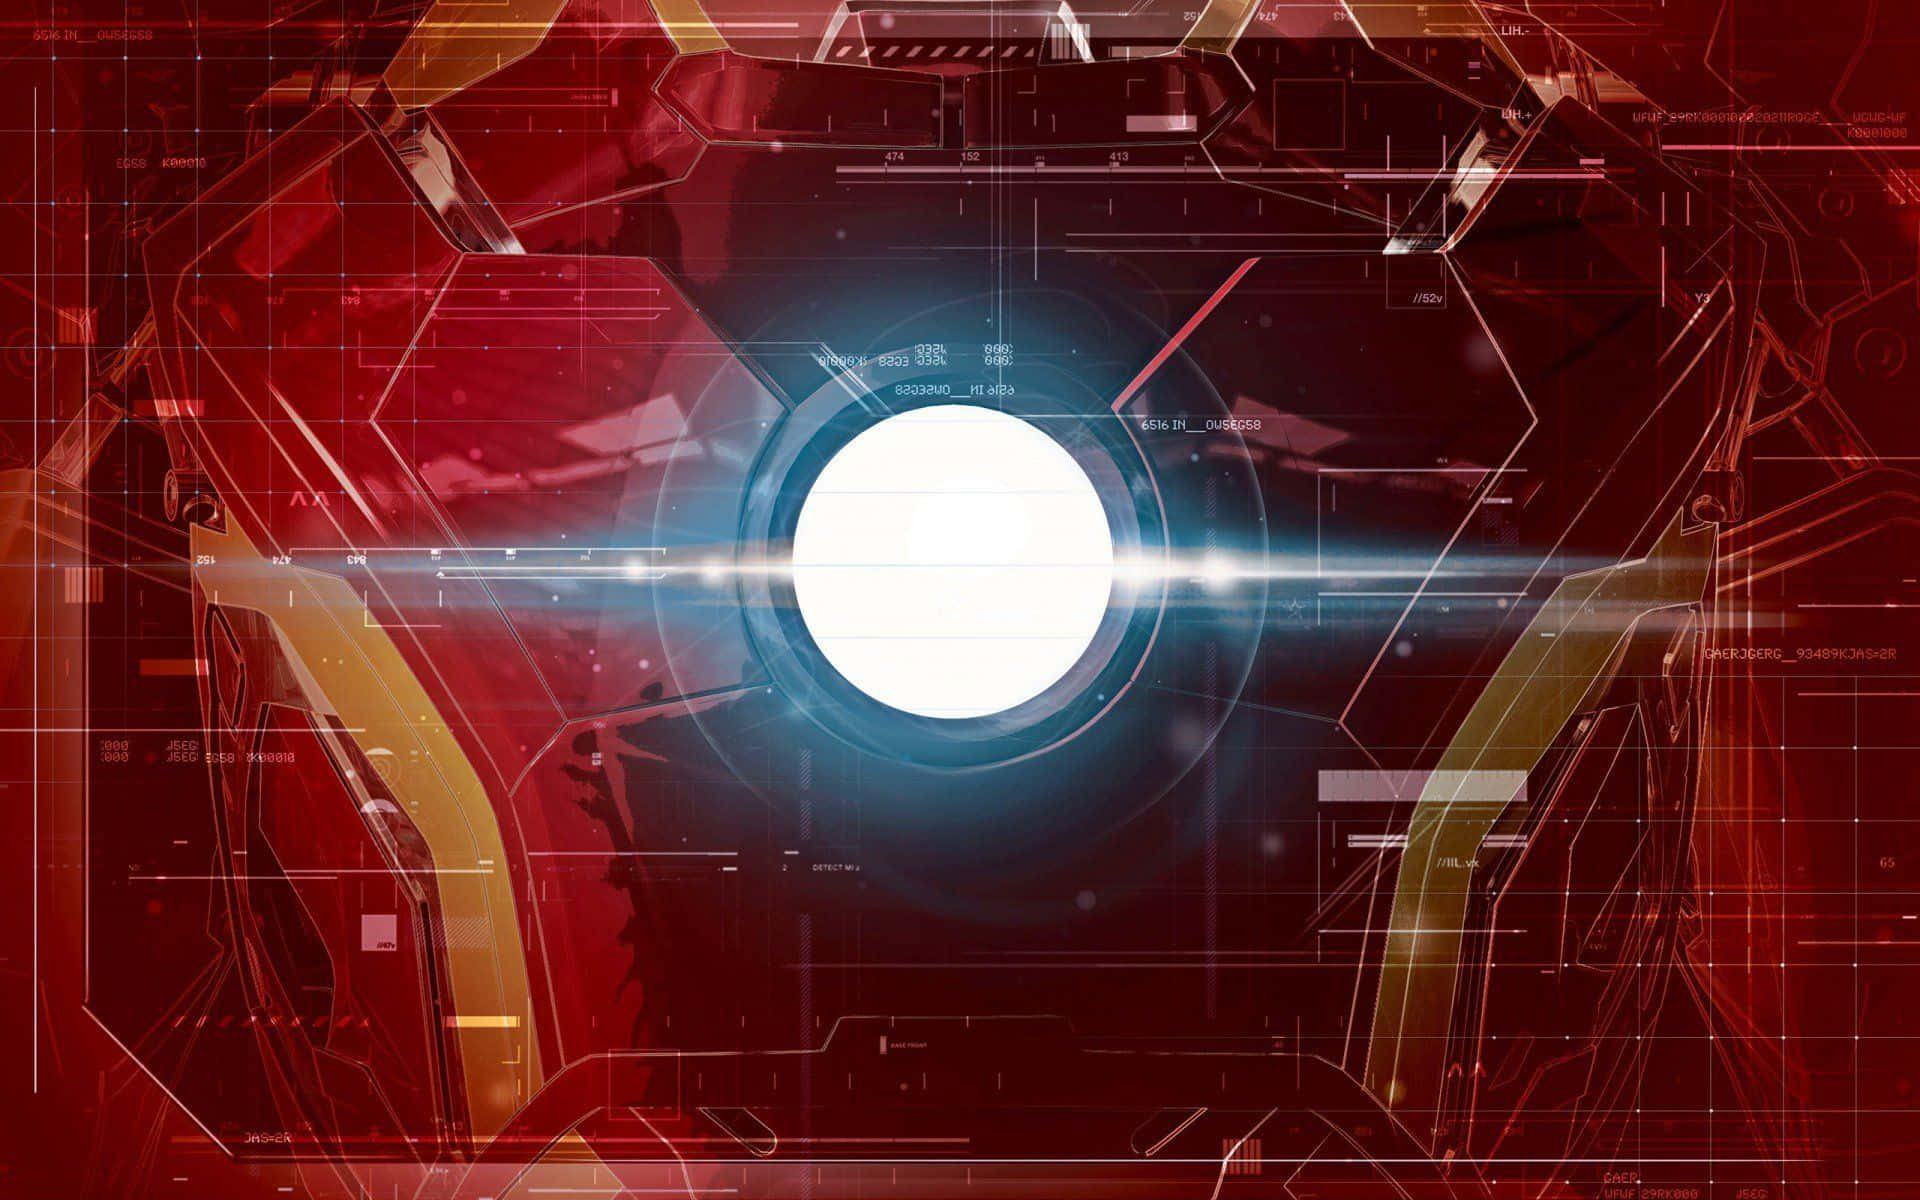 Explore the World of Iron Man with the Arc Reactor Wallpaper